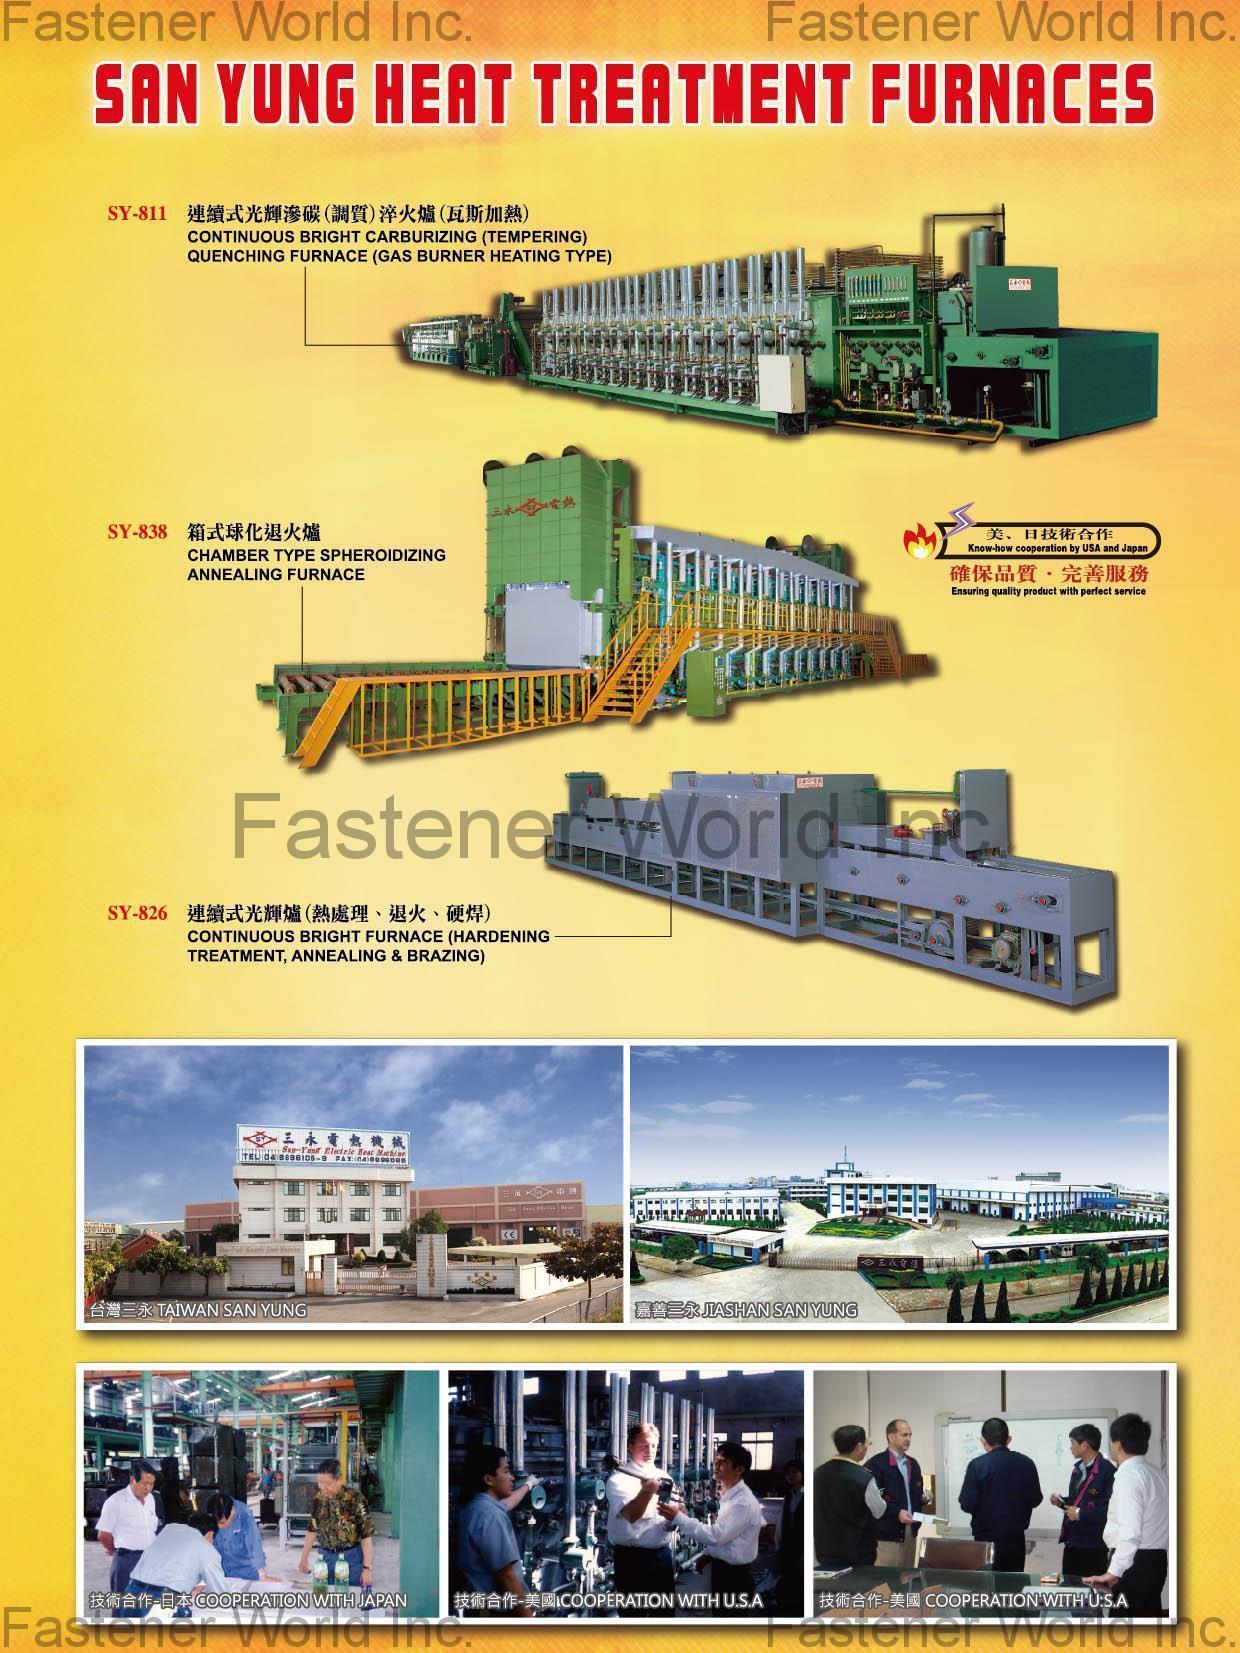 SAN YUNG ELECTRIC HEAT MACHINE CO., LTD.  , Continuous Bright Carburizing (Hardening) Quenching Furnace (Electric Heating Type), Chamber Type Spheroidizing Annealing Furnace, Continuous Bright Furnace (Hardening Treatment, Annealing & Brazing) , Annealing Furnace